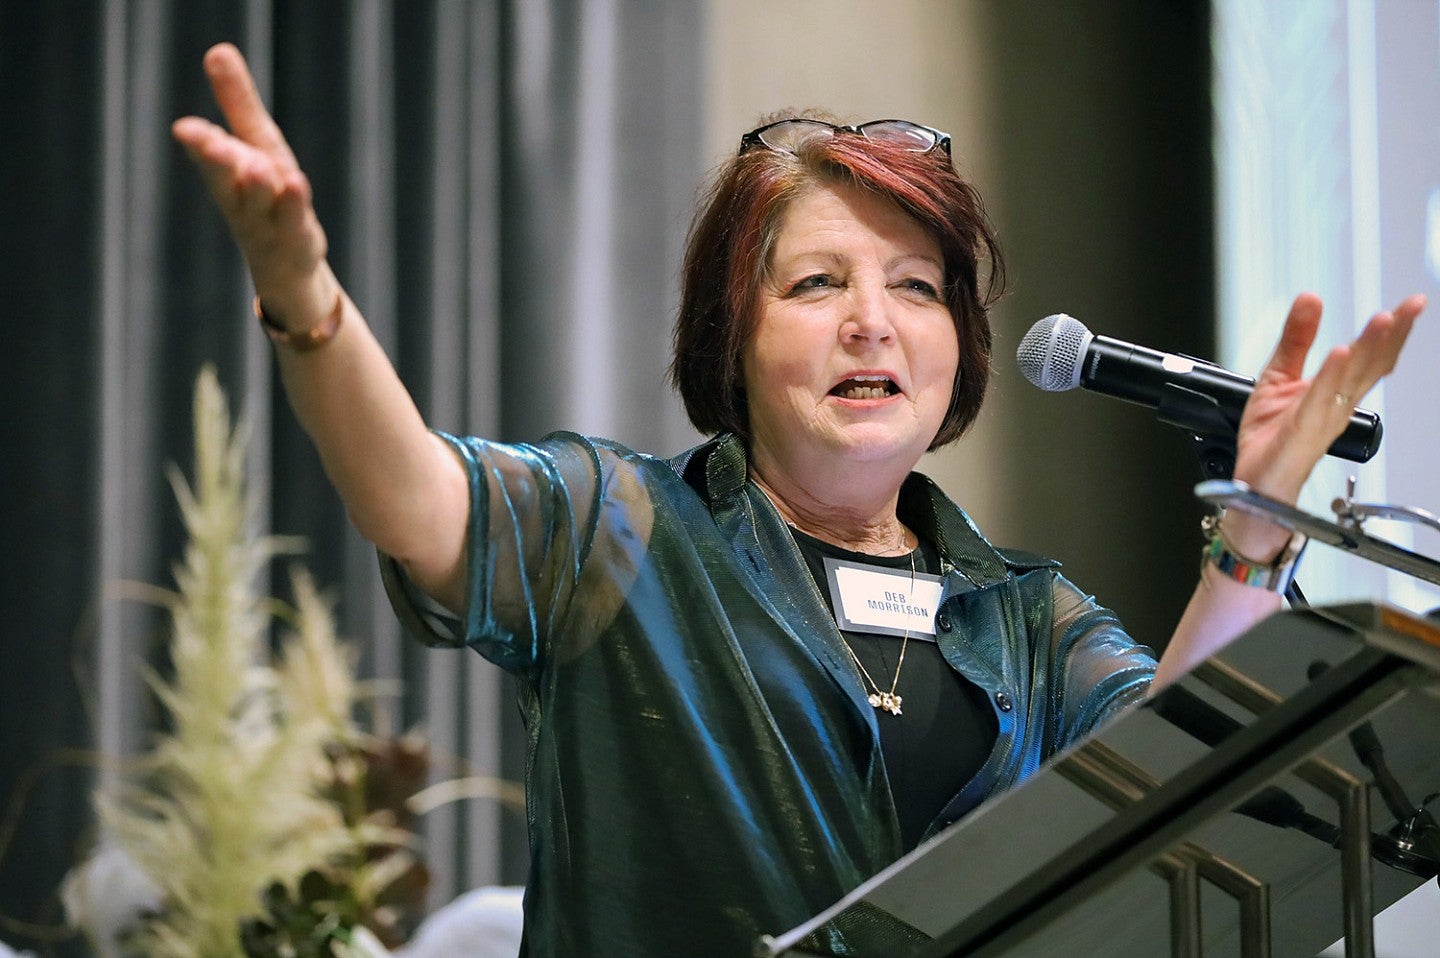 Deb Morrison gestures at a lectern and speaks into a microphone at the SOJC Hall of Achievement gala